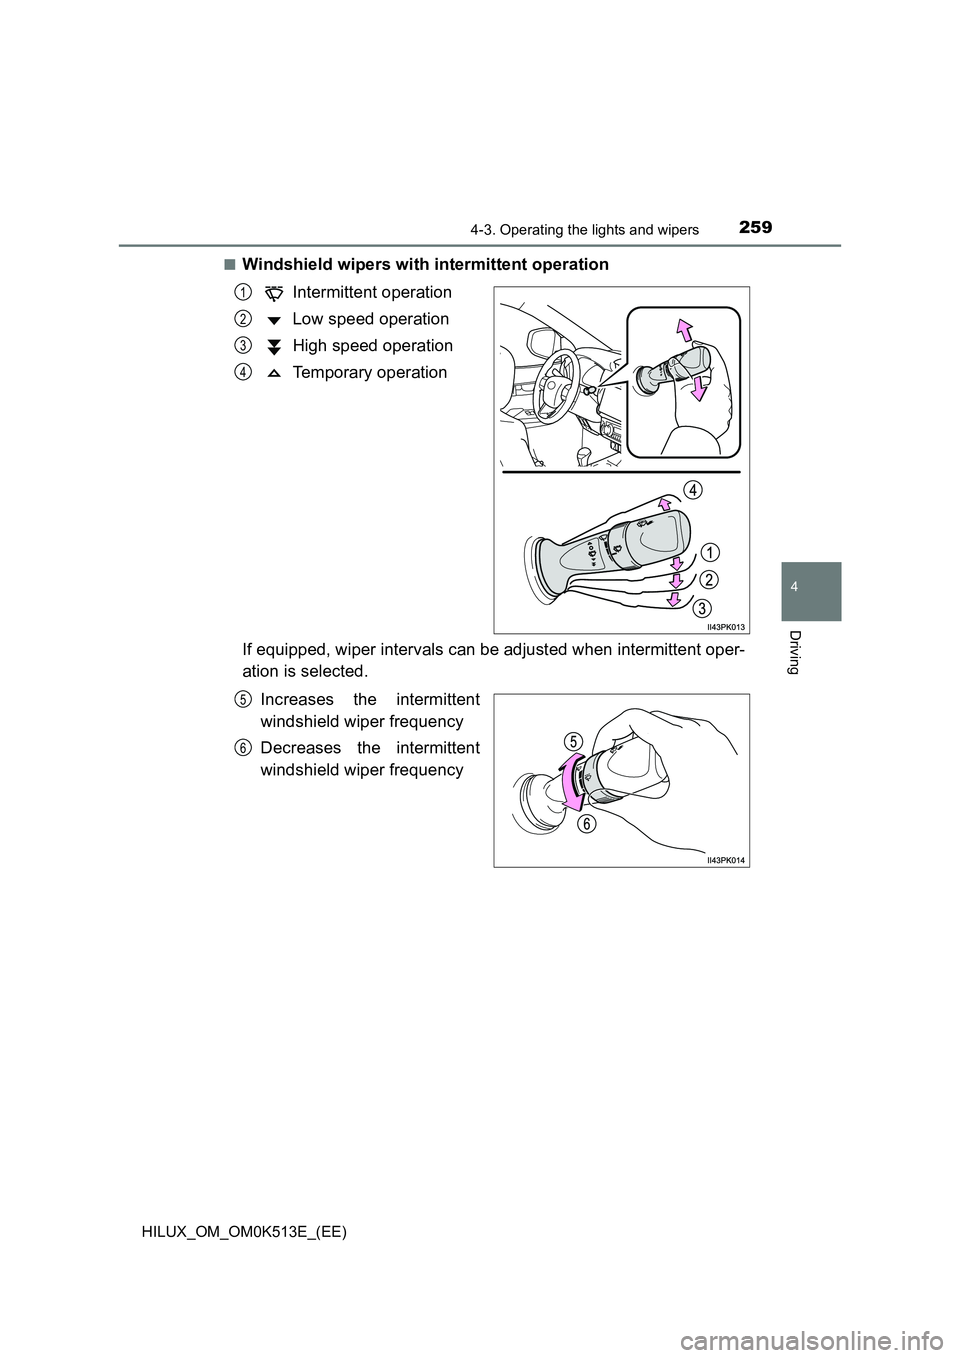 TOYOTA HILUX 2021  Owners Manual (in English) 2594-3. Operating the lights and wipers
4
Driving
HILUX_OM_OM0K513E_(EE) 
�QWindshield wipers with intermittent operation 
Intermittent operation 
Low speed operation 
High speed operation 
Temporary 